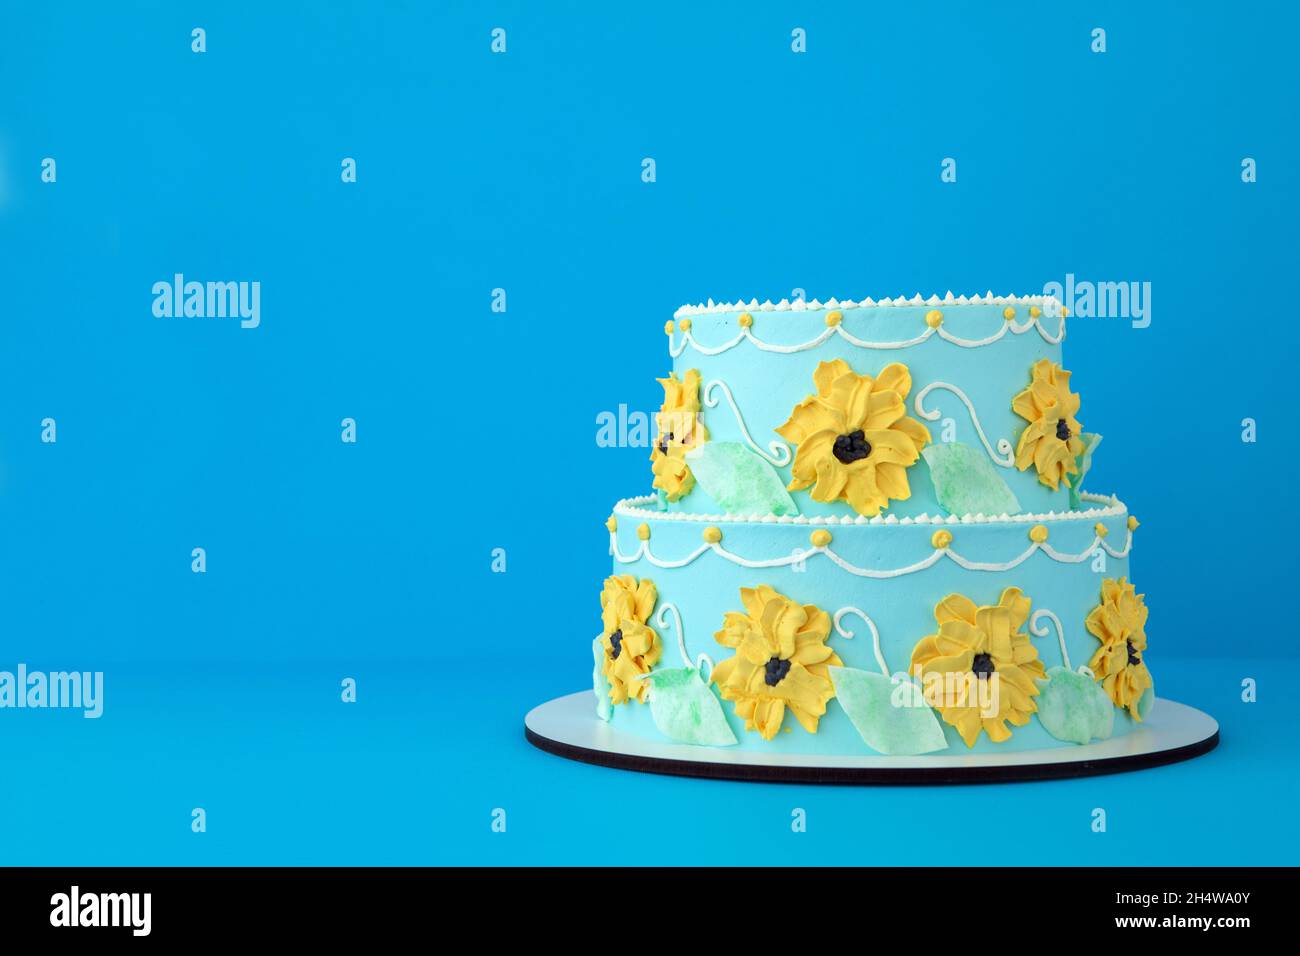 Two-tiered cake for a little girl princess with yellow flowers on blue background like a cartoon Beautiful sunflower decorated cake Stock Photo